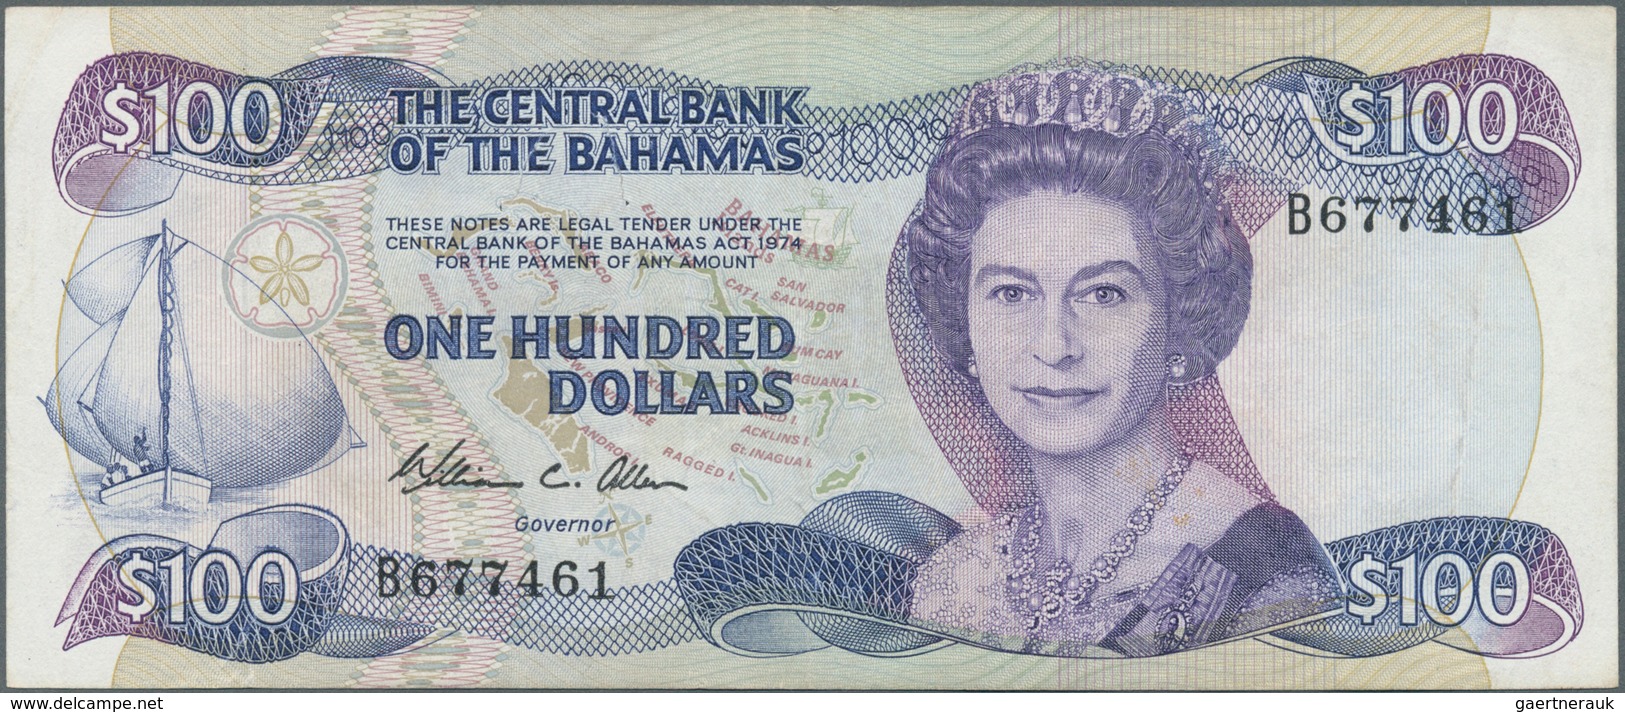 01102 Bahamas: 100 Dollars ND(1984) P. 49, Rare Note, Used With Only Light Folds, A Few Pinholes, Pressed - Bahamas